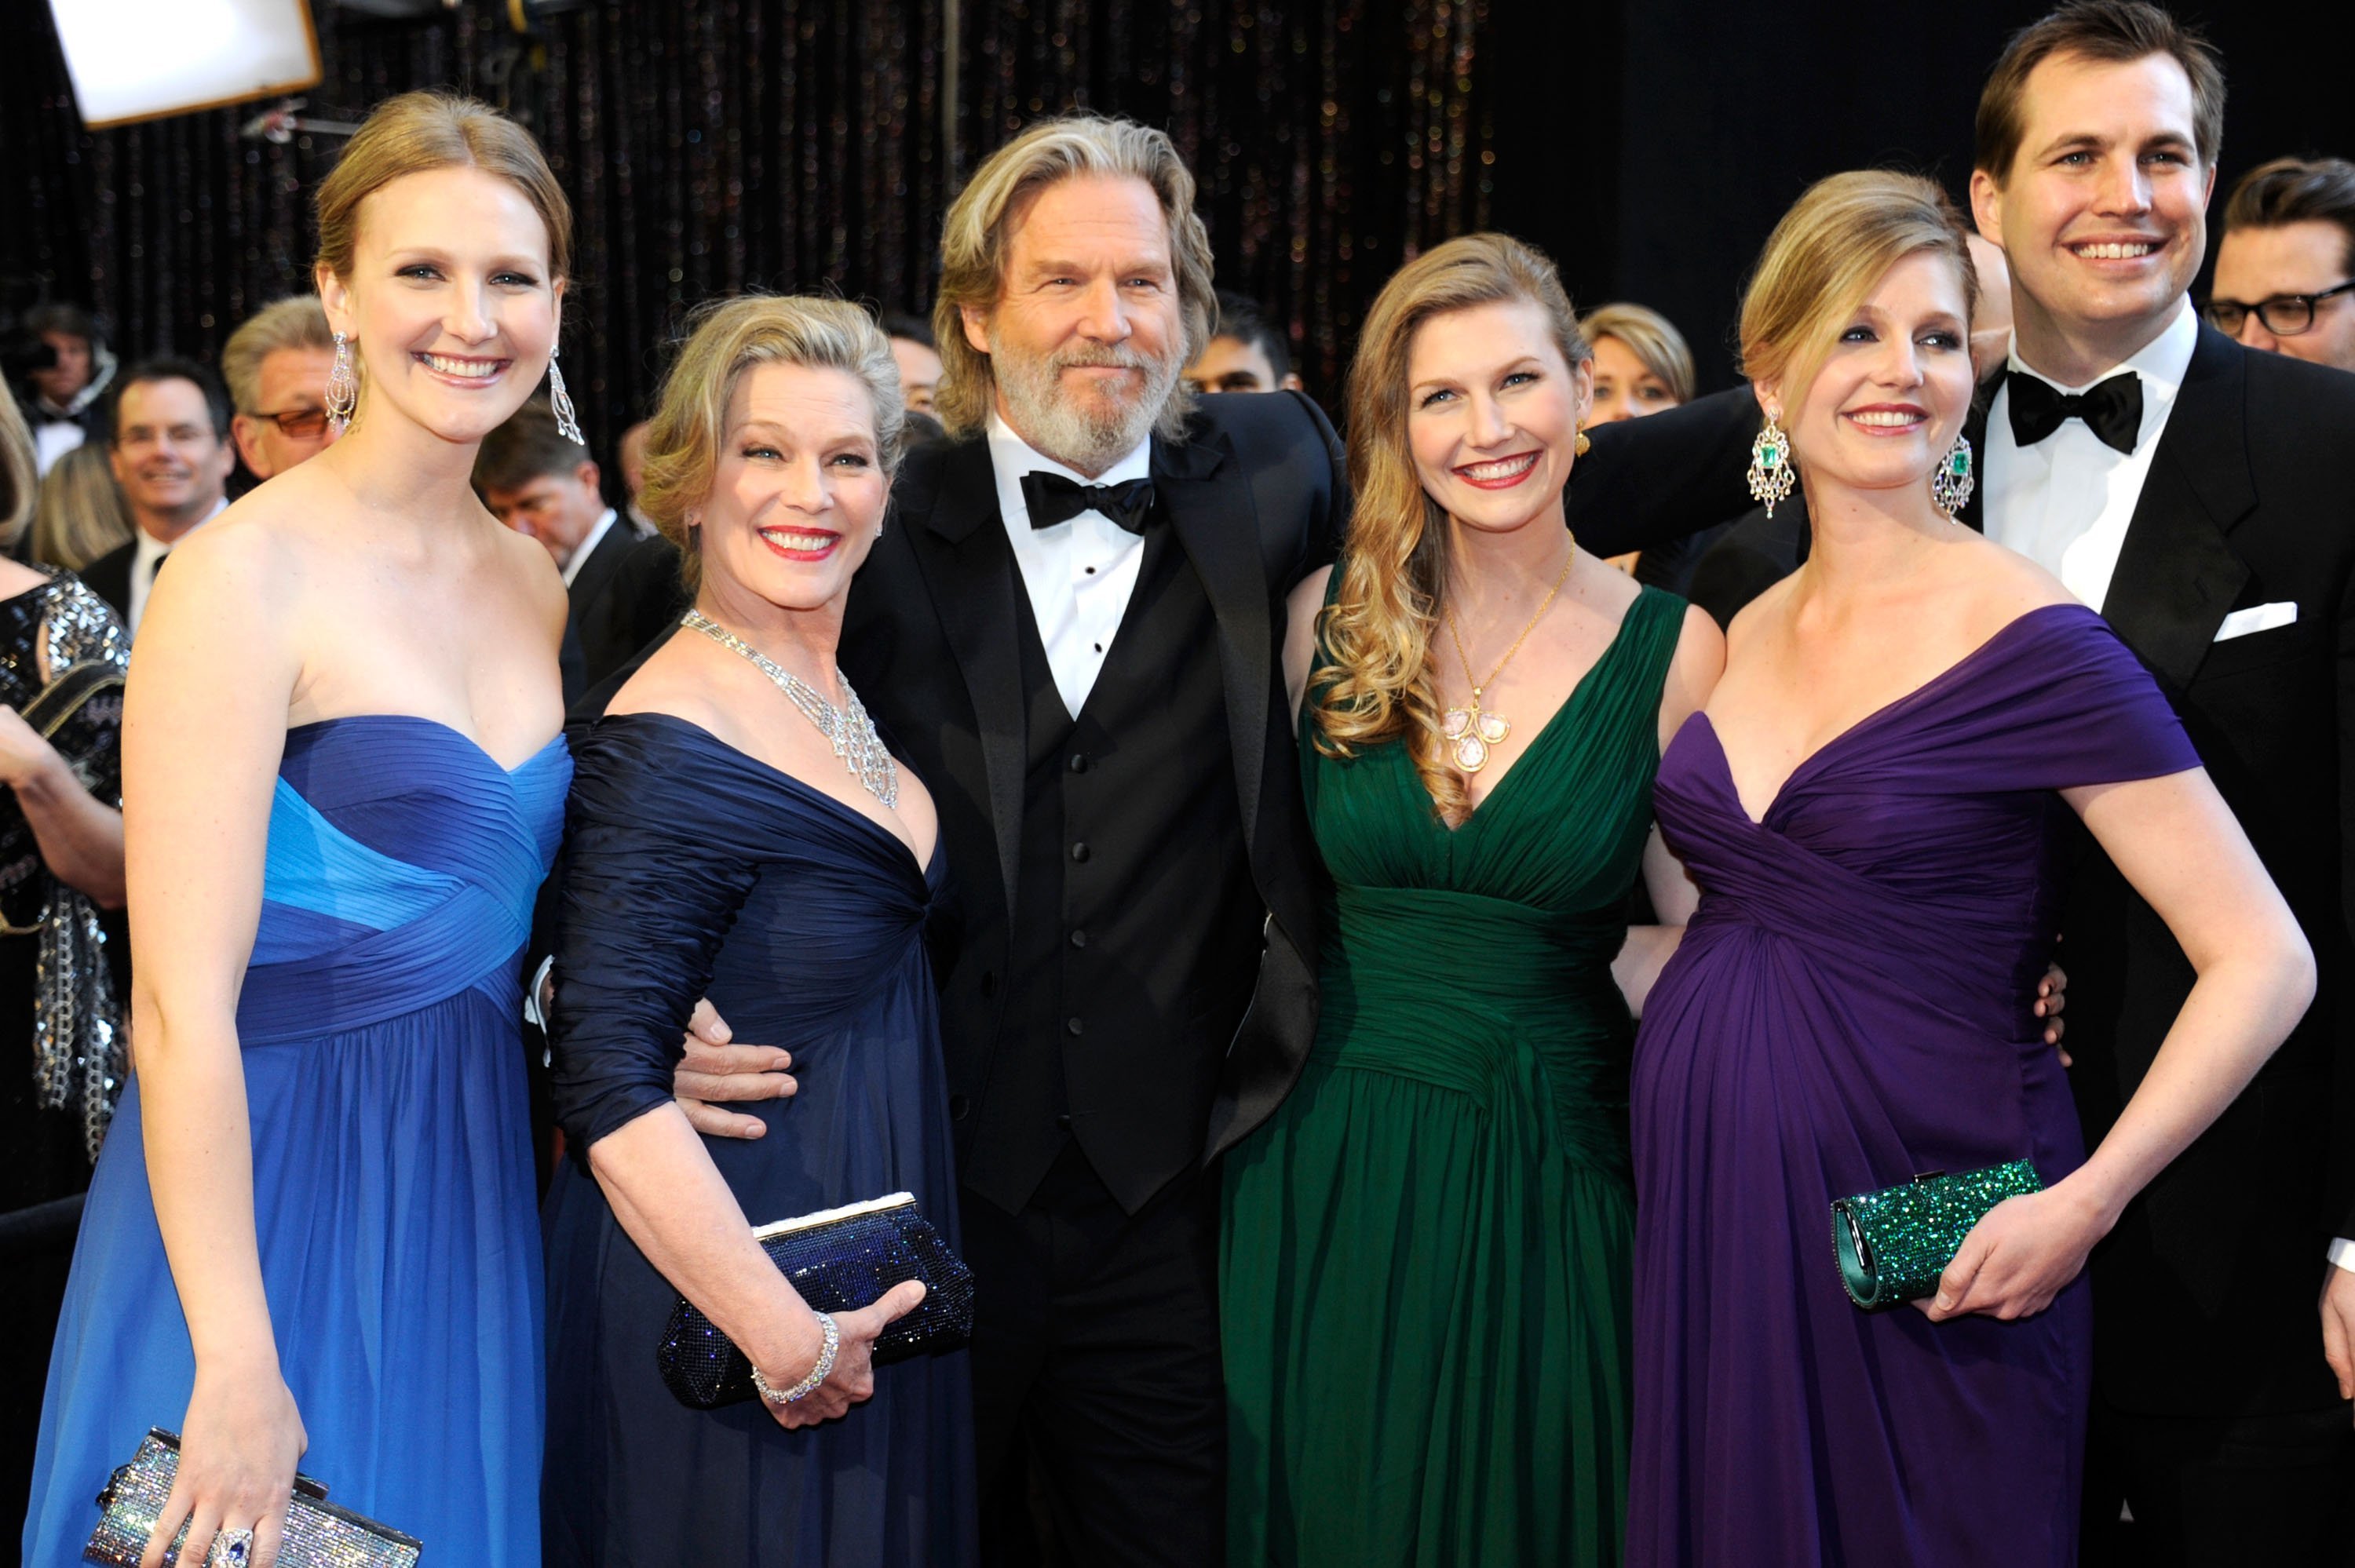 Jeff Bridges, wife Susan Bridges and family arrive at the 83rd Annual Academy Awards on February 27, 2011. | Source: Getty Images